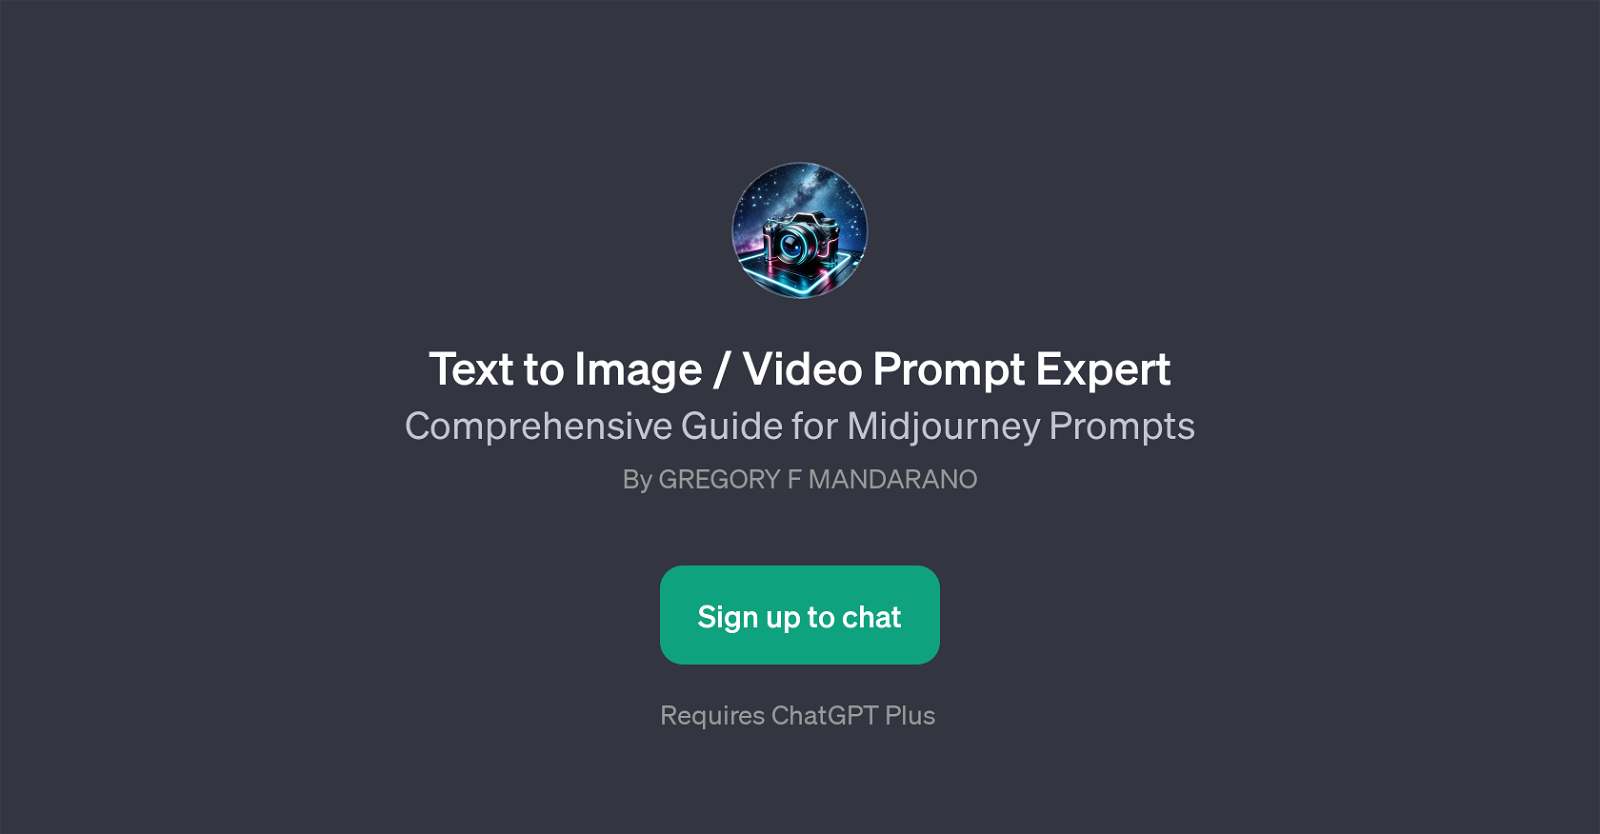 Text to Image / Video Prompt Expert website